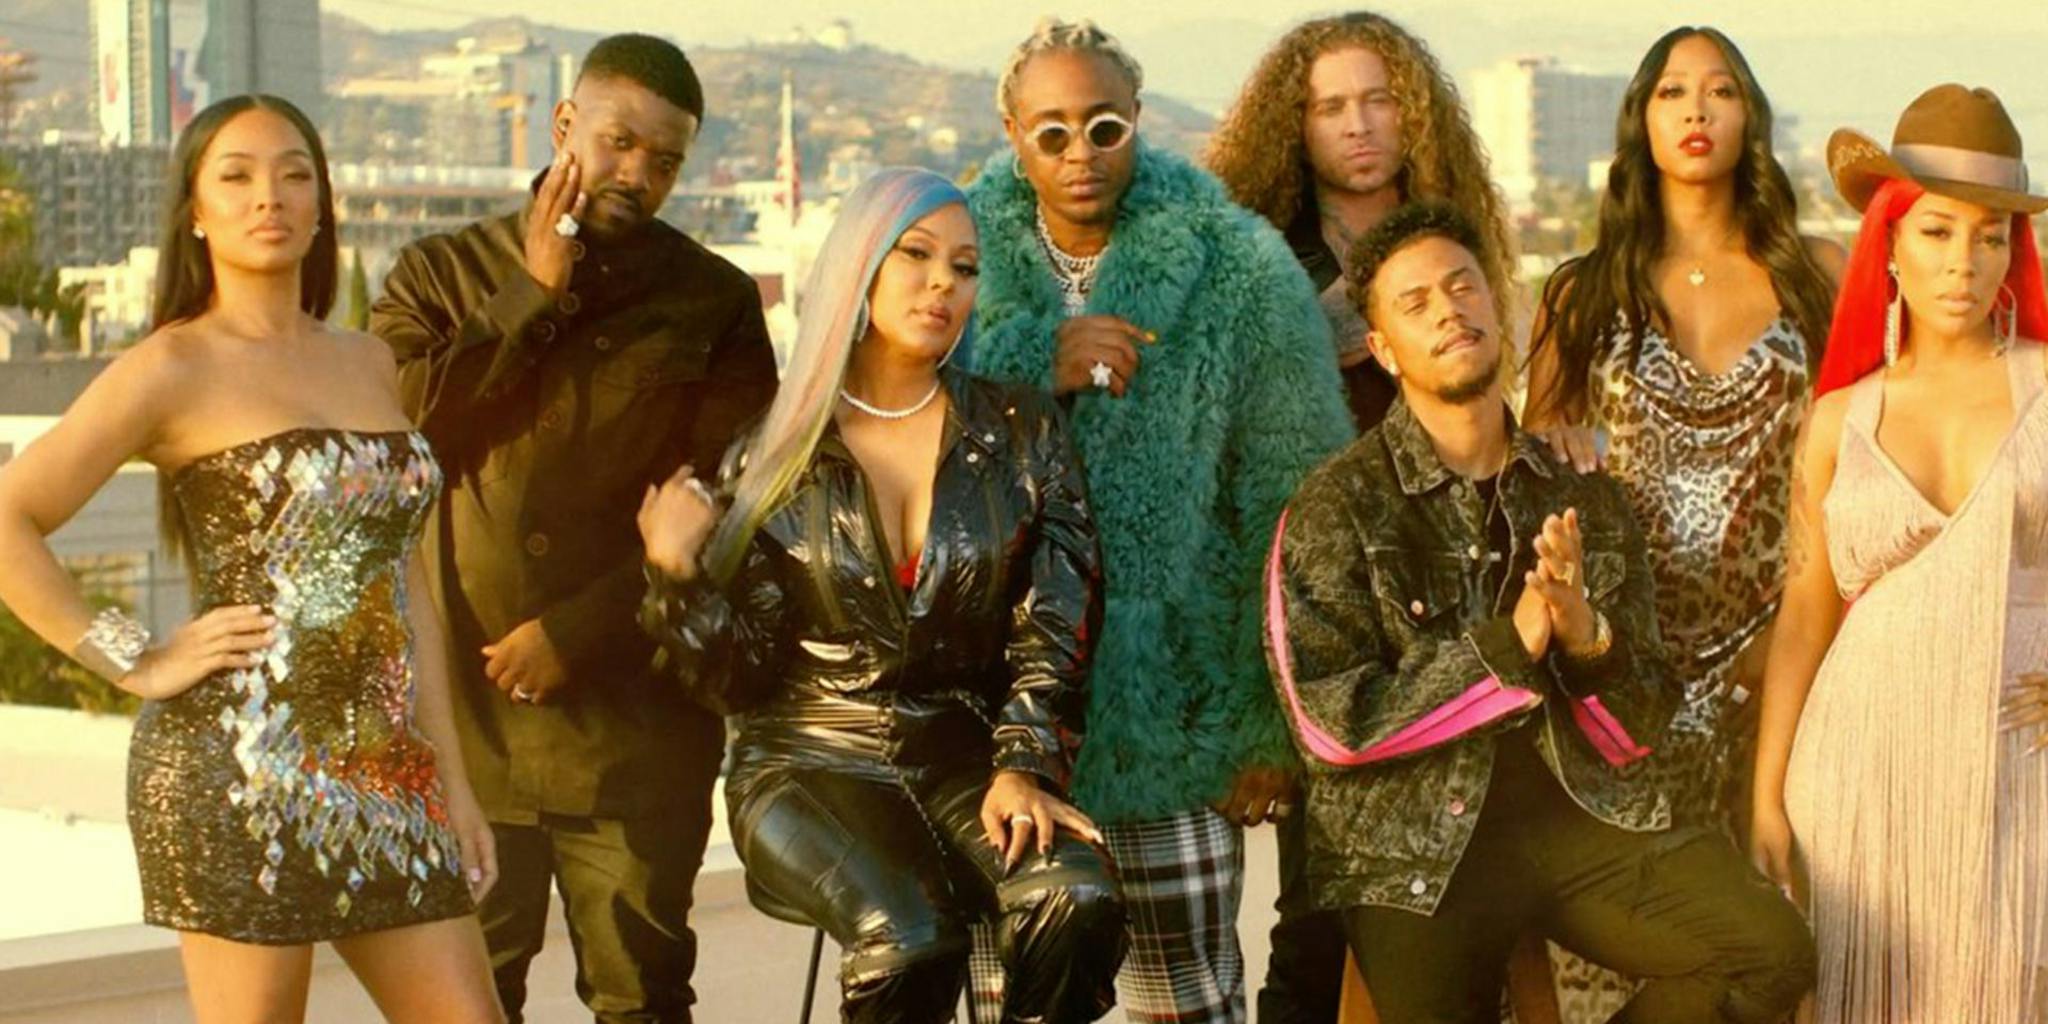 Watch 'Love & Hip Hip Hollywood' Stream Season 6 and Old Episodes